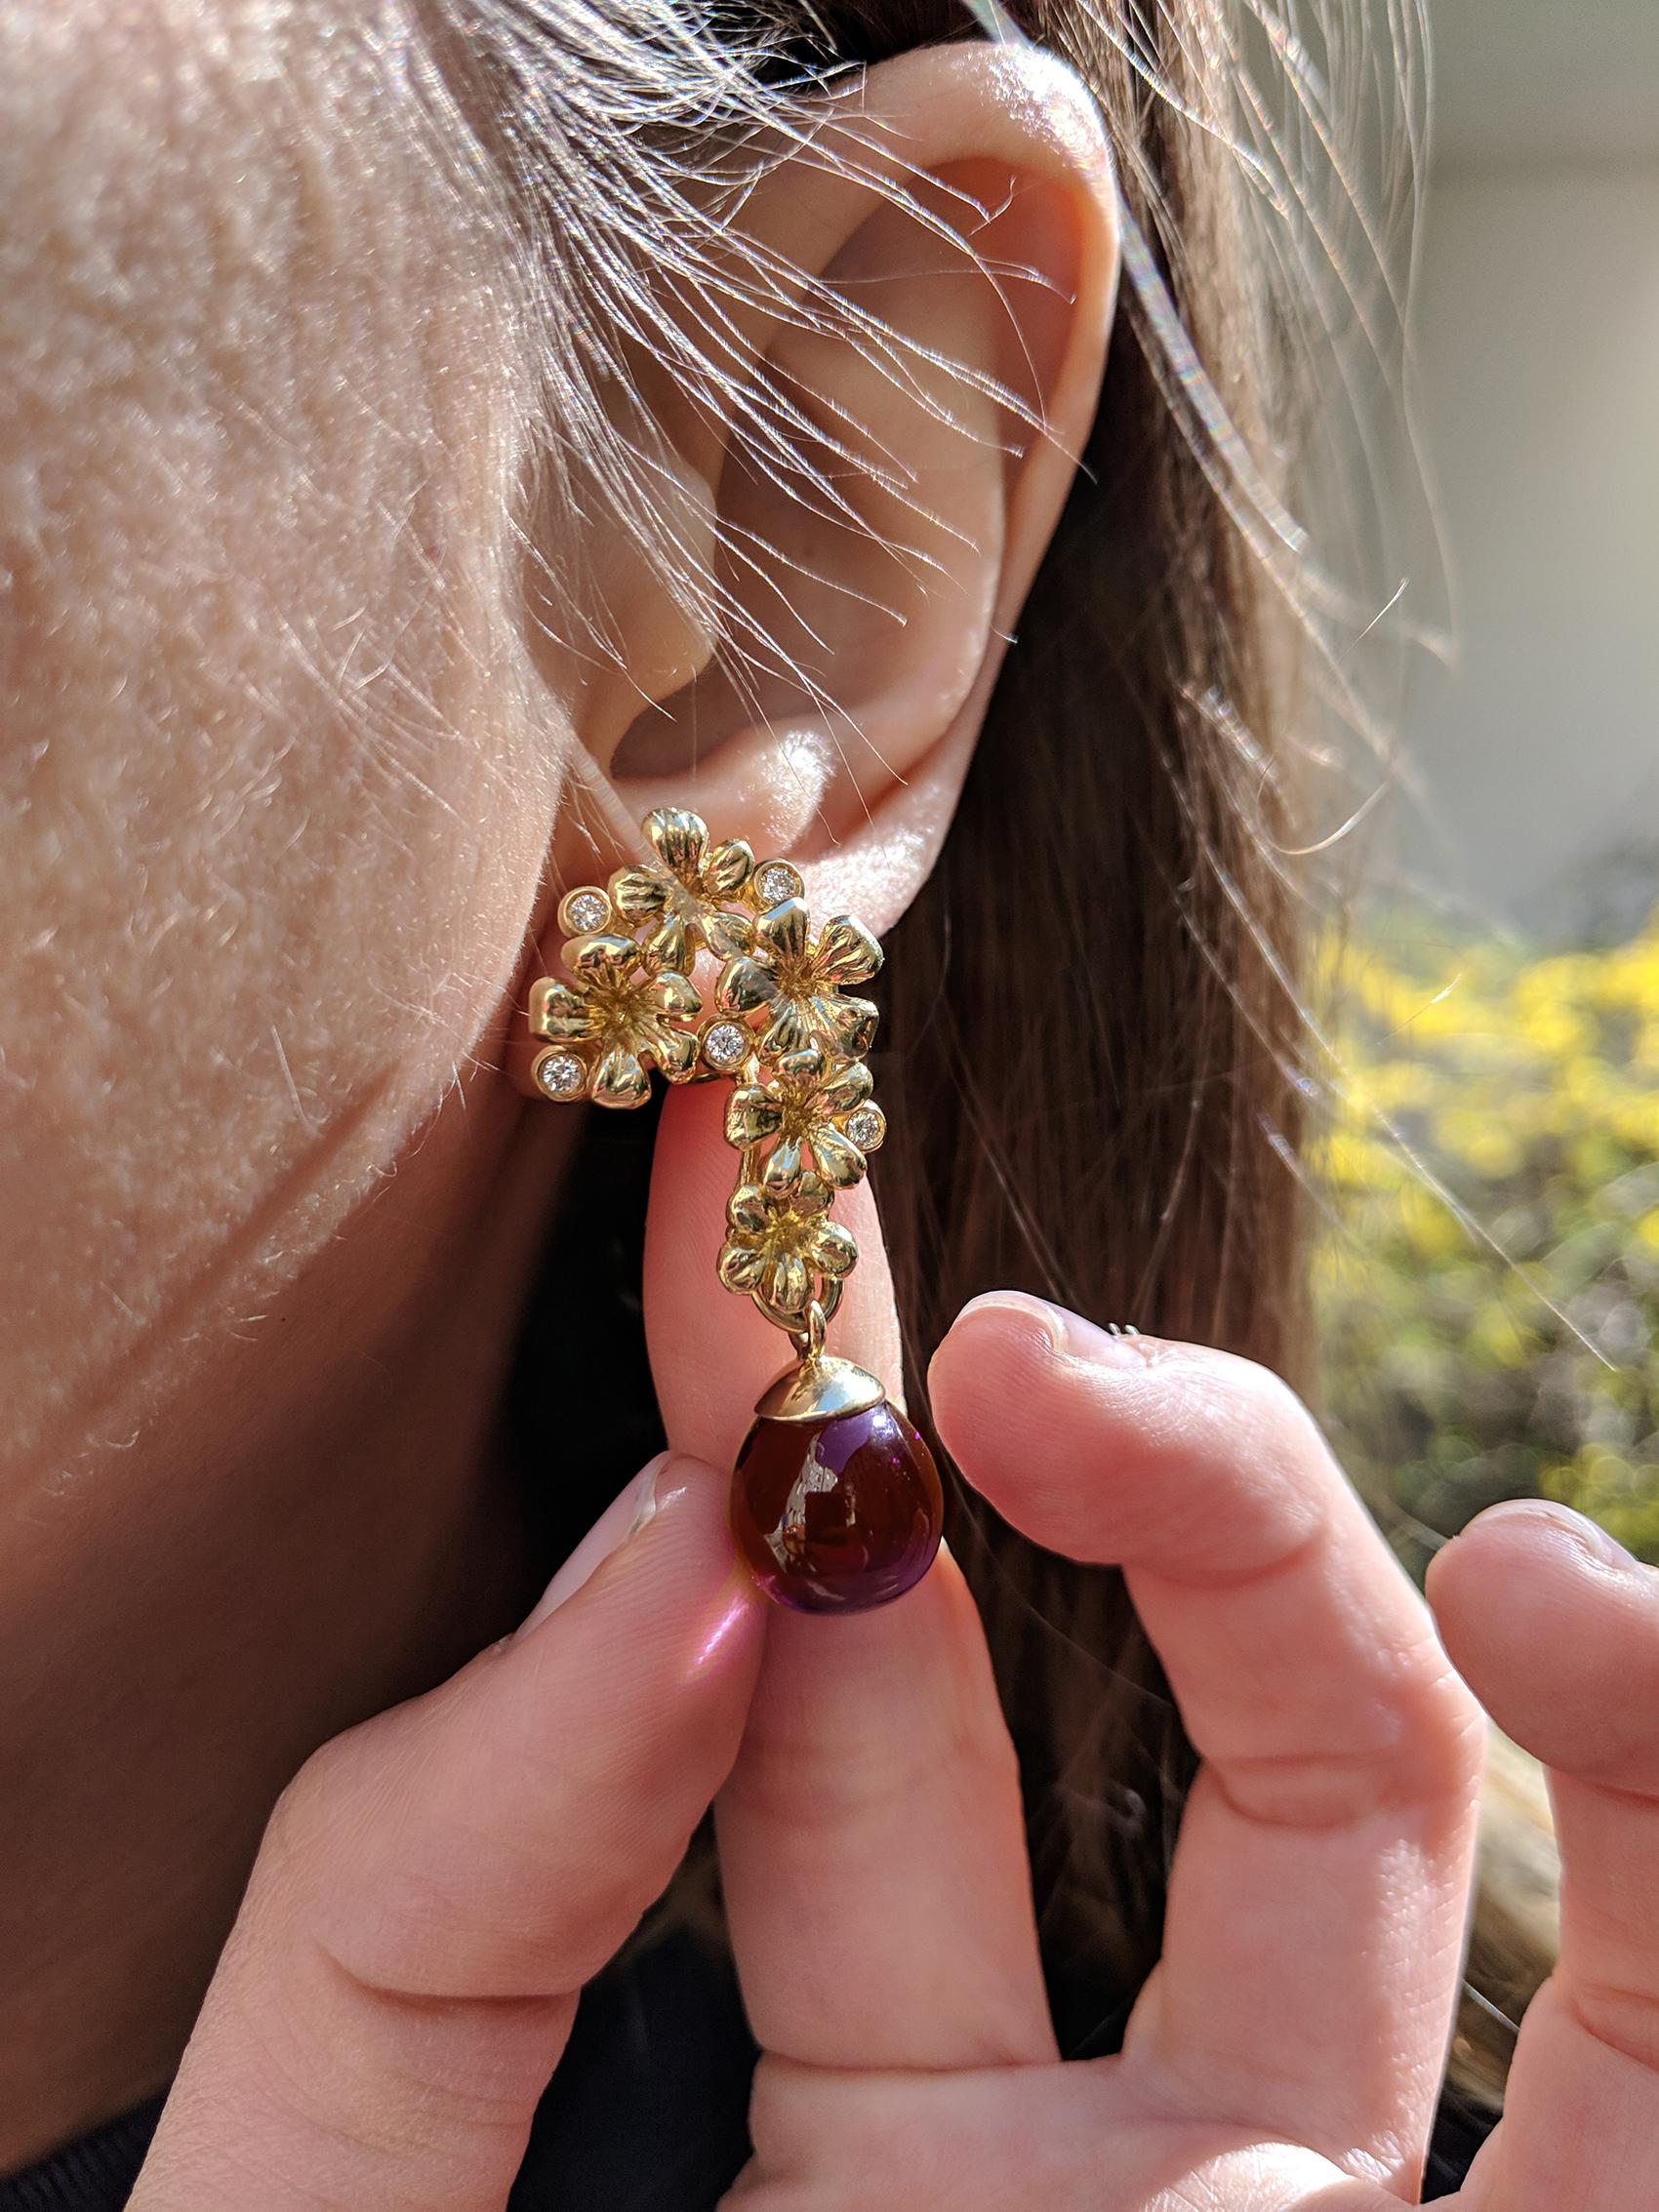 These Plum Blossom cocktail transformer modern earrings with detachable cabochon garnet drops are encrusted with 10 round diamonds. The earrings are made of 18 karat yellow gold and belong to the collection featured in Vogue UA review, influenced by